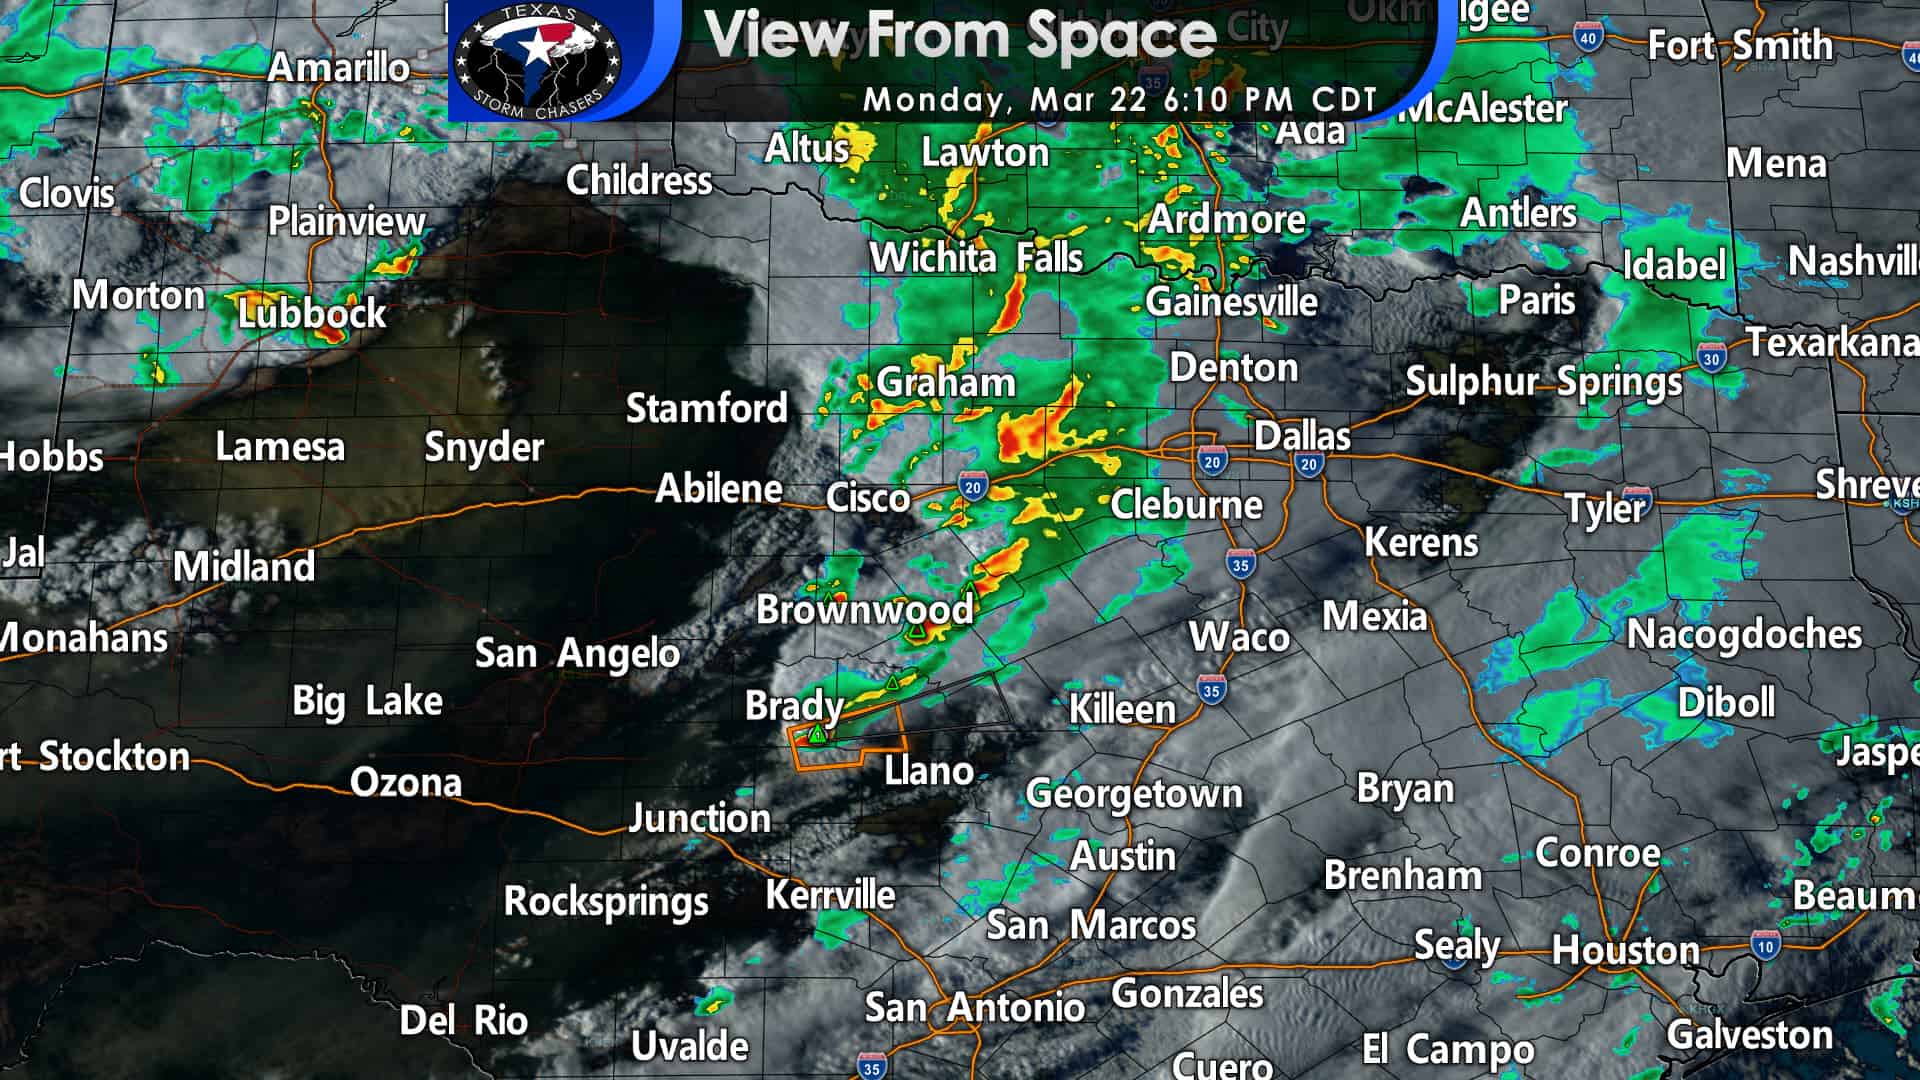 Dinnertime Update: Severe Storm Watch for North/Central Texas ’till Midnight